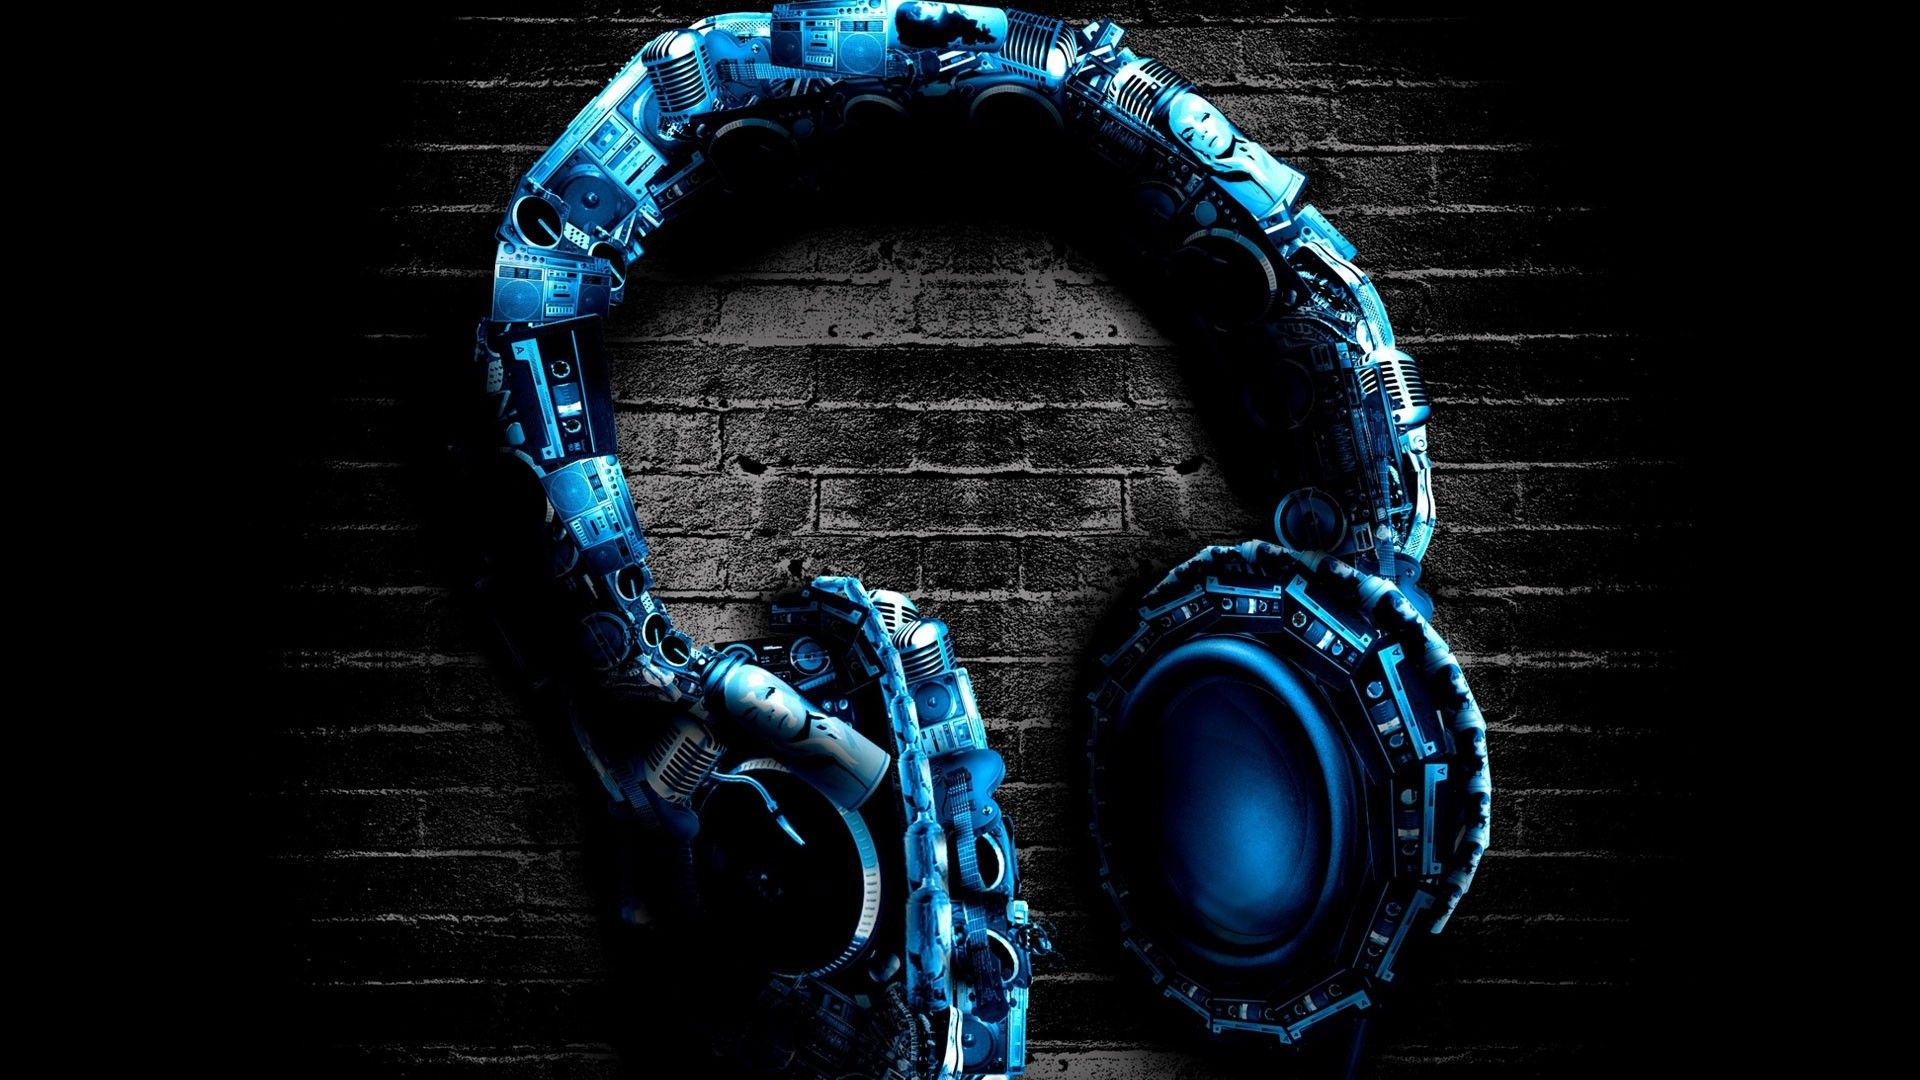 General 1920x1080 black background headphones collage microphone music wall bricks boombox cassette